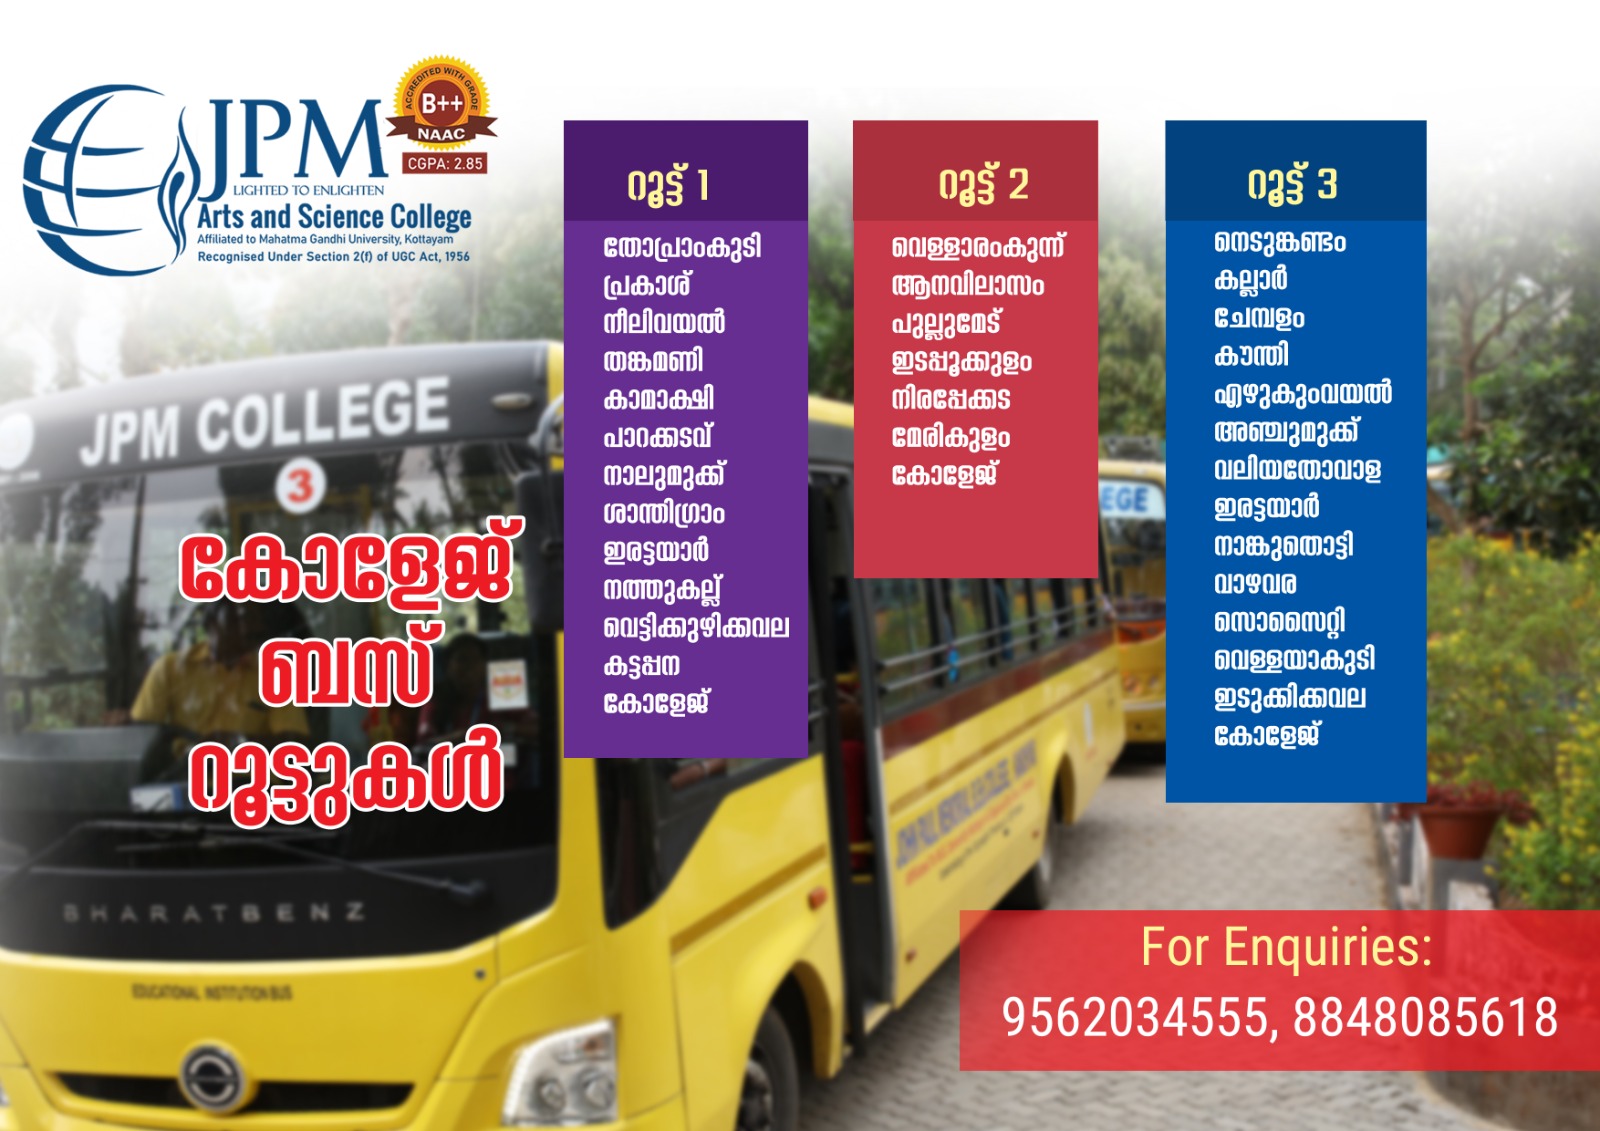 College Bus facility available